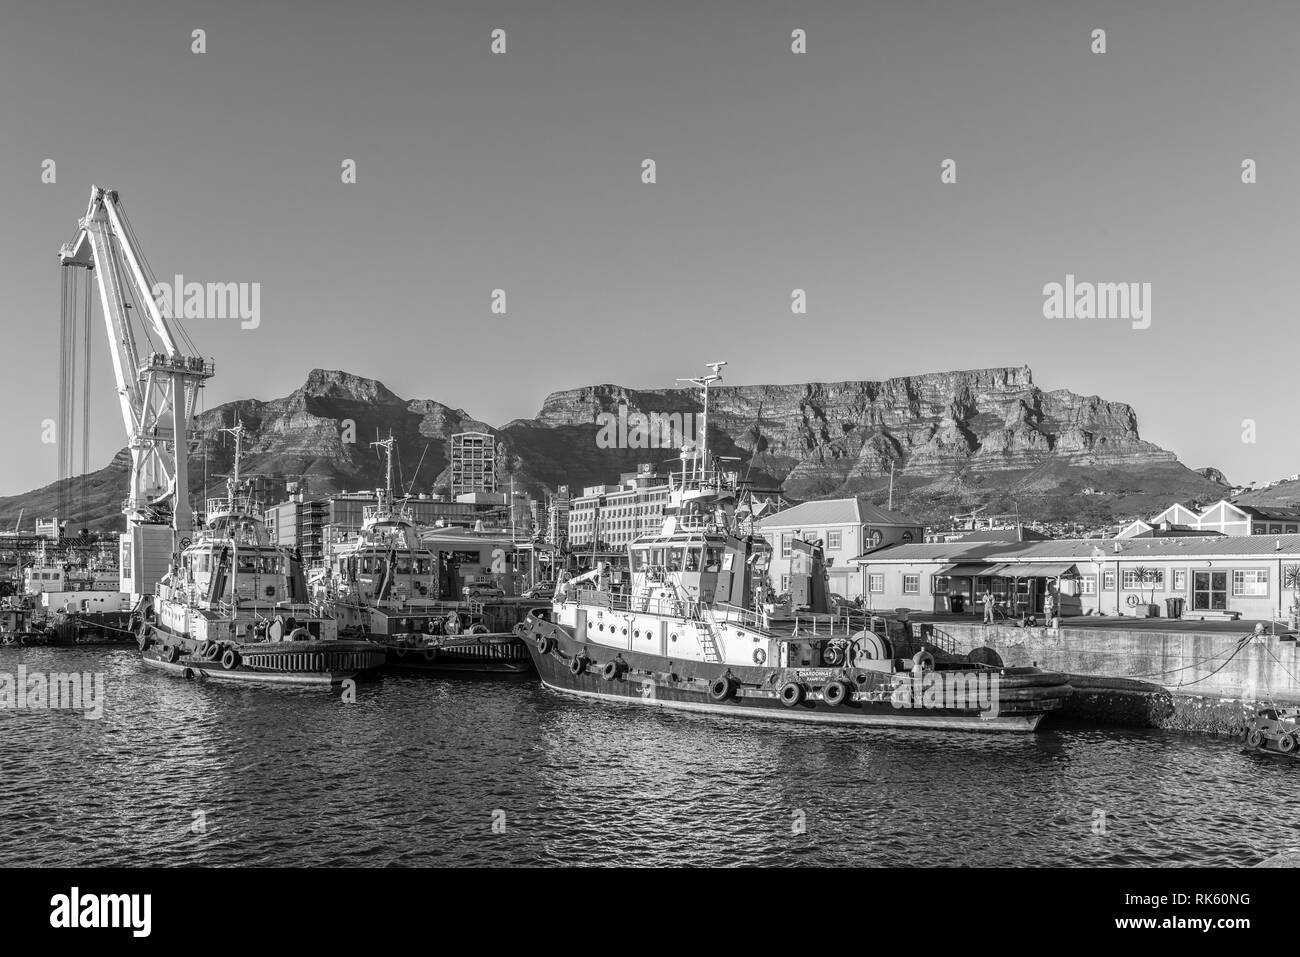 CAPE TOWN, SOUTH AFRICA, AUGUST 9, 2018:  The harbor and the Victoria and Alfred Waterfront in Cape Town in the Western Cape Province. Tugboats, a cra Stock Photo